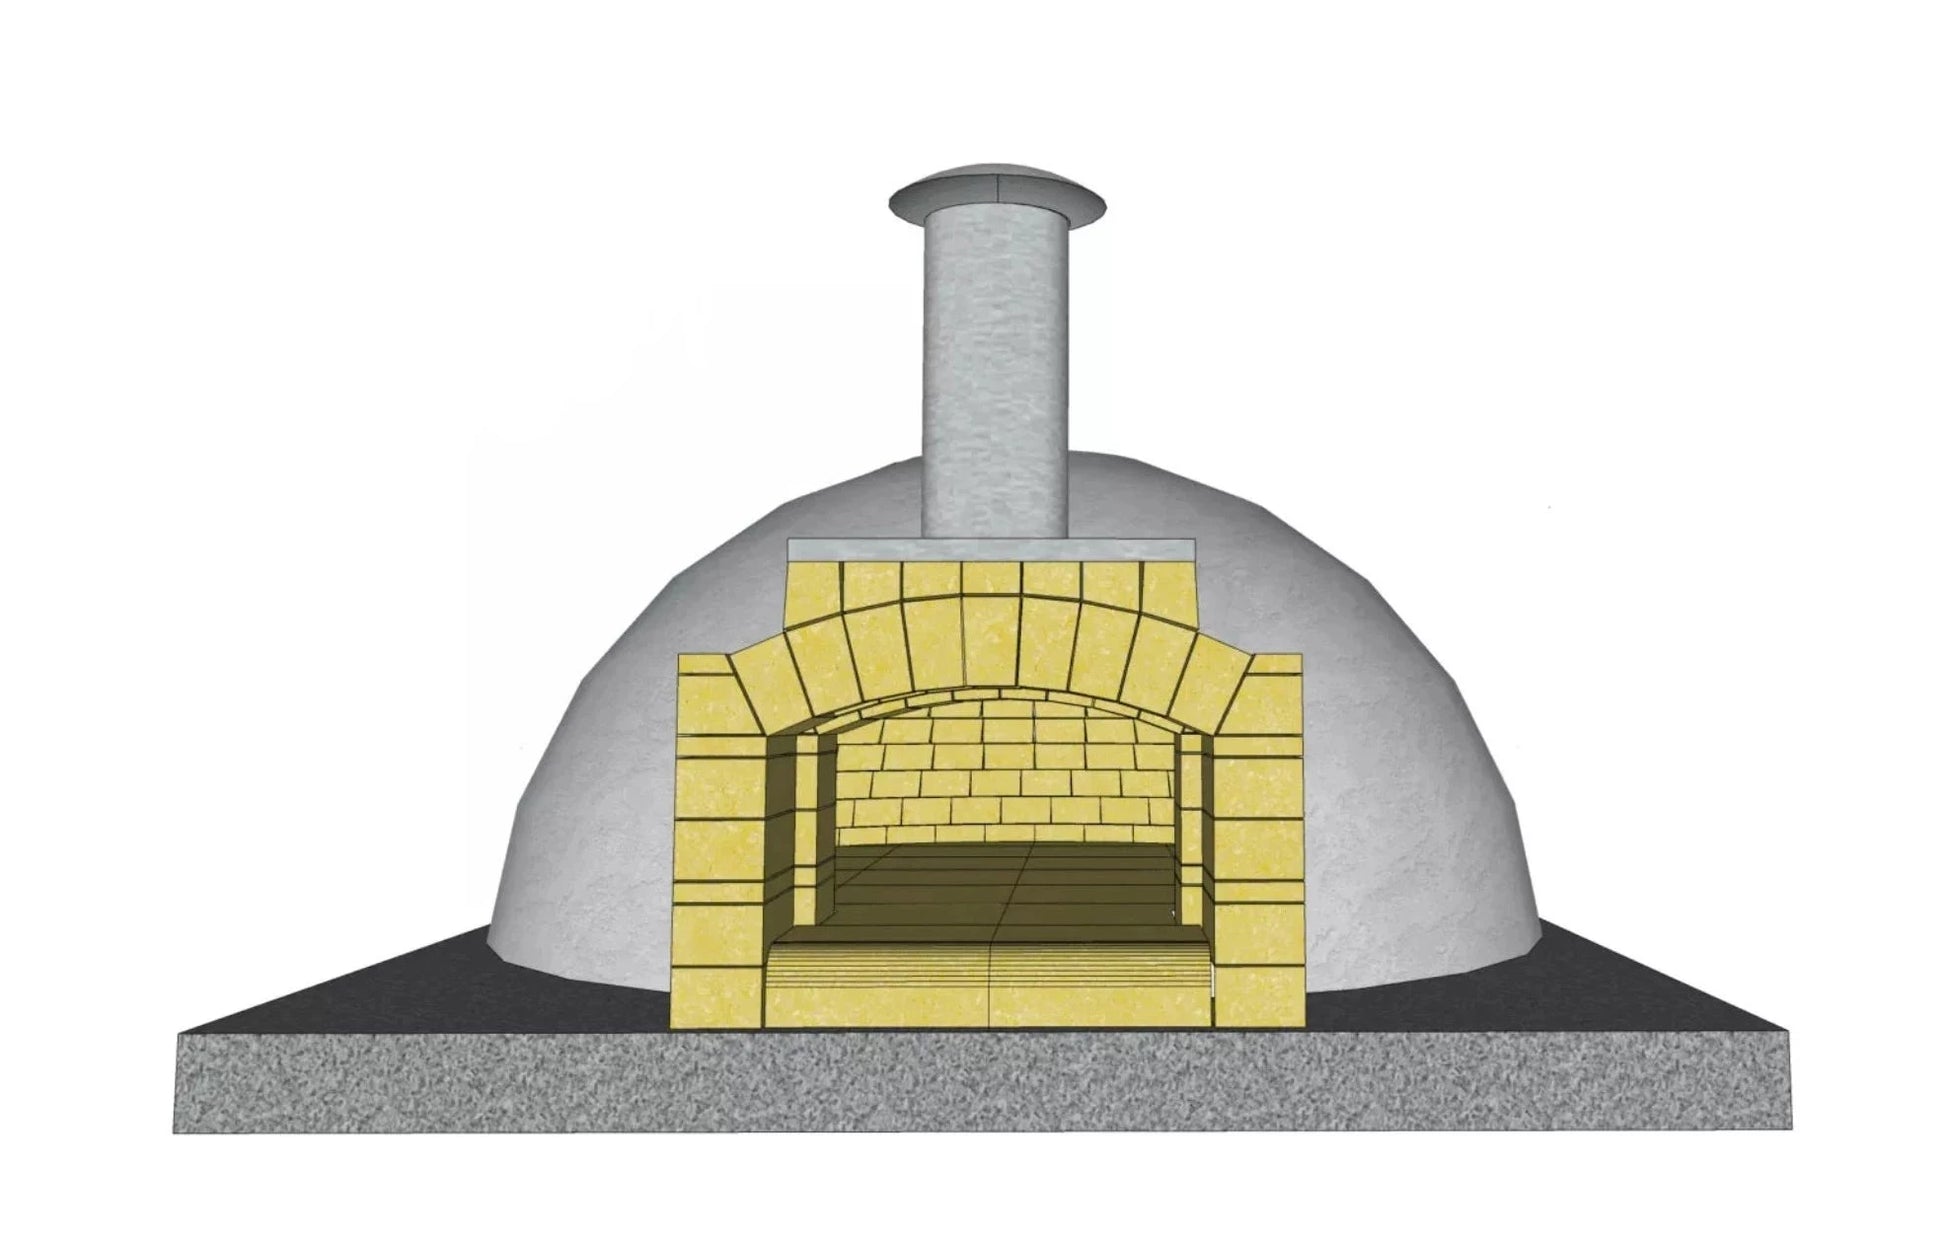 1500 PRECUT Brick dome oven kit - The Woodfired Co.